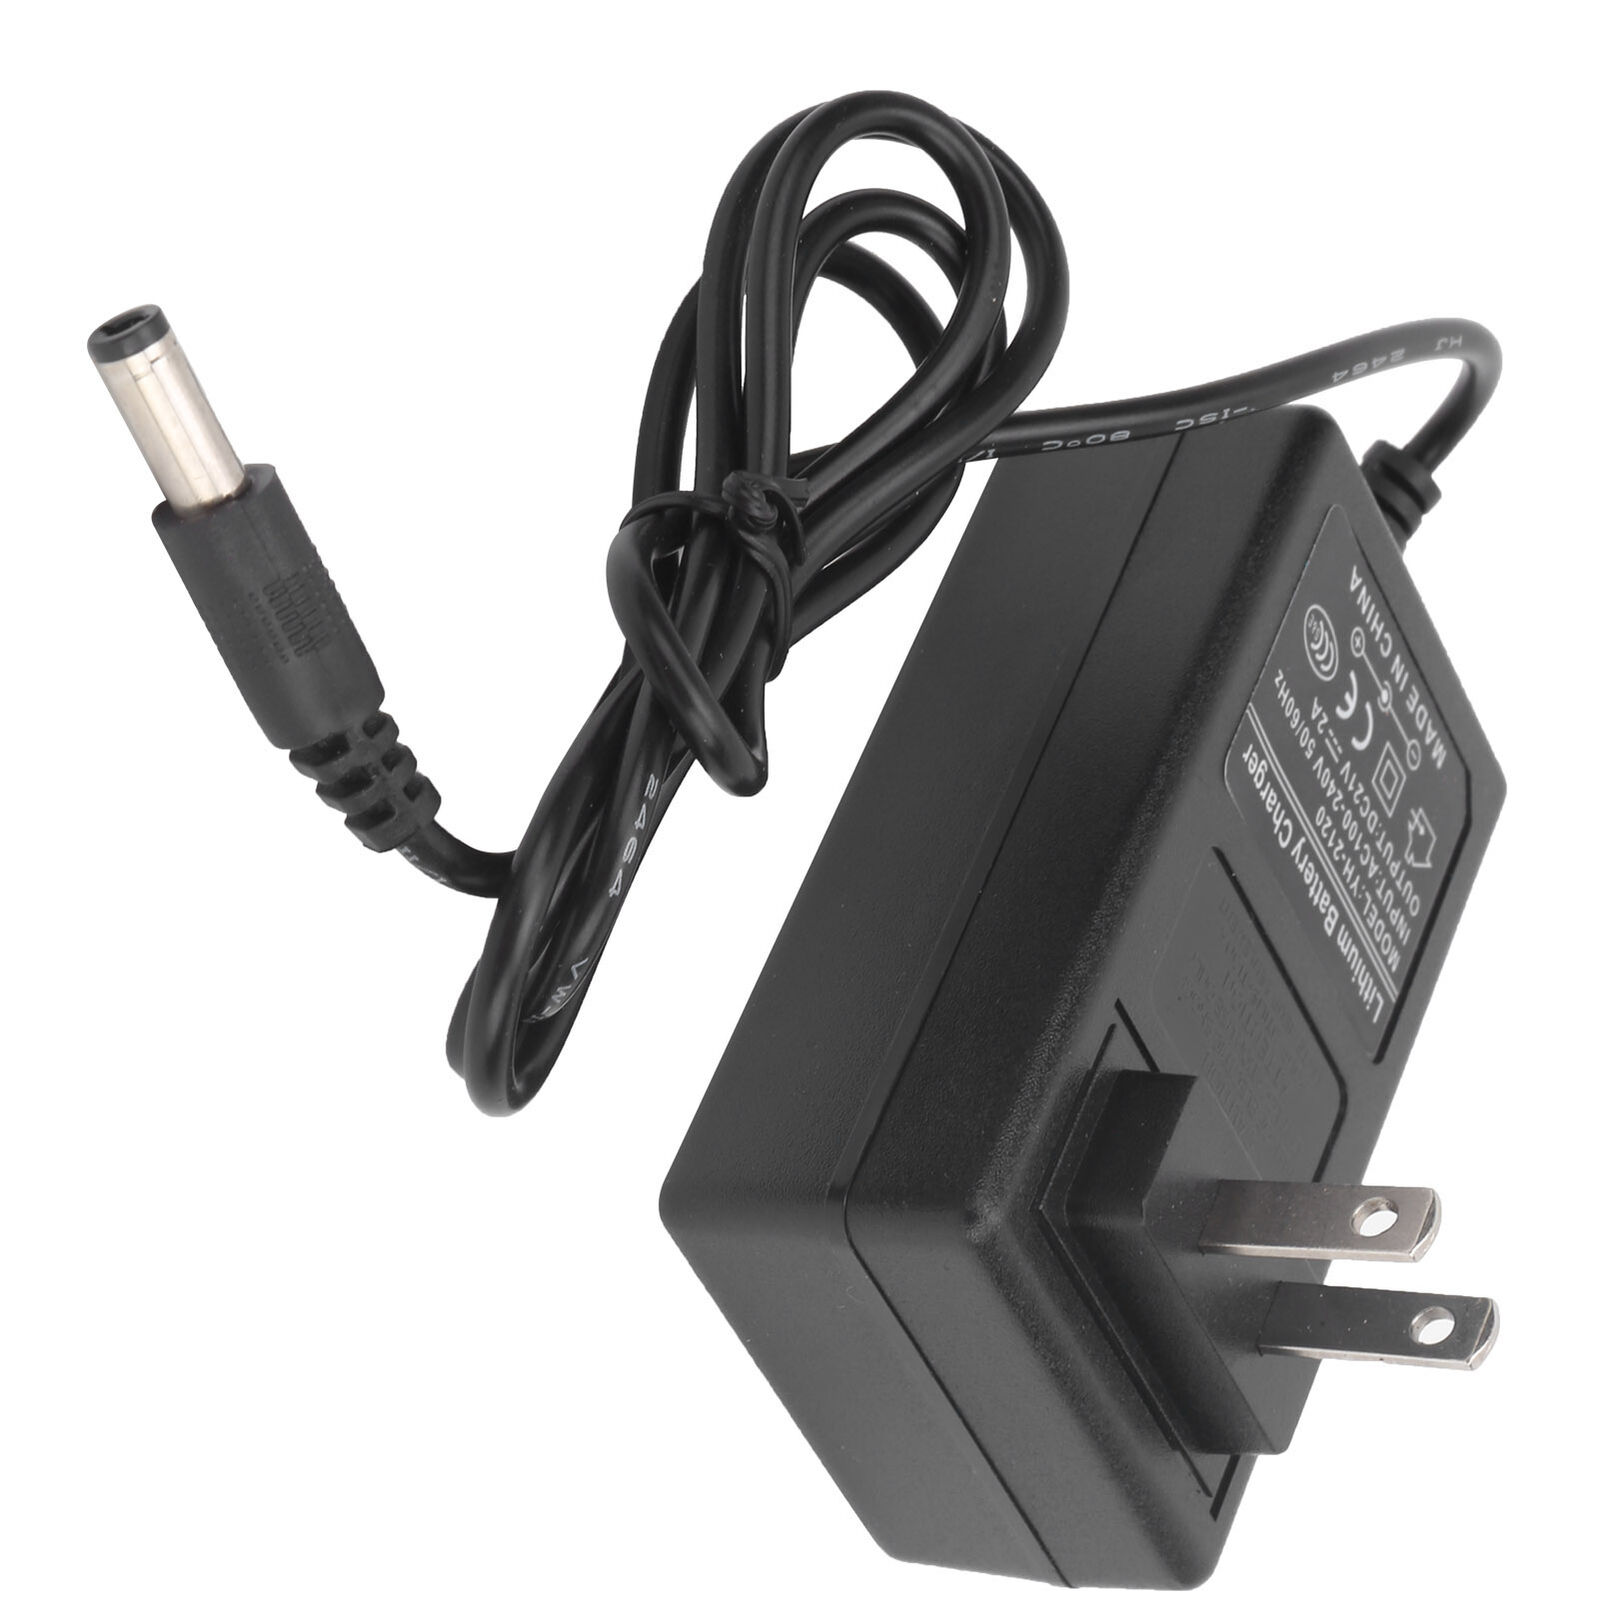 *Brand NEW* Nextbook Ares 11 NXA116QC164 11.6" Tablet AC/DC Adapter Charger Power Supply